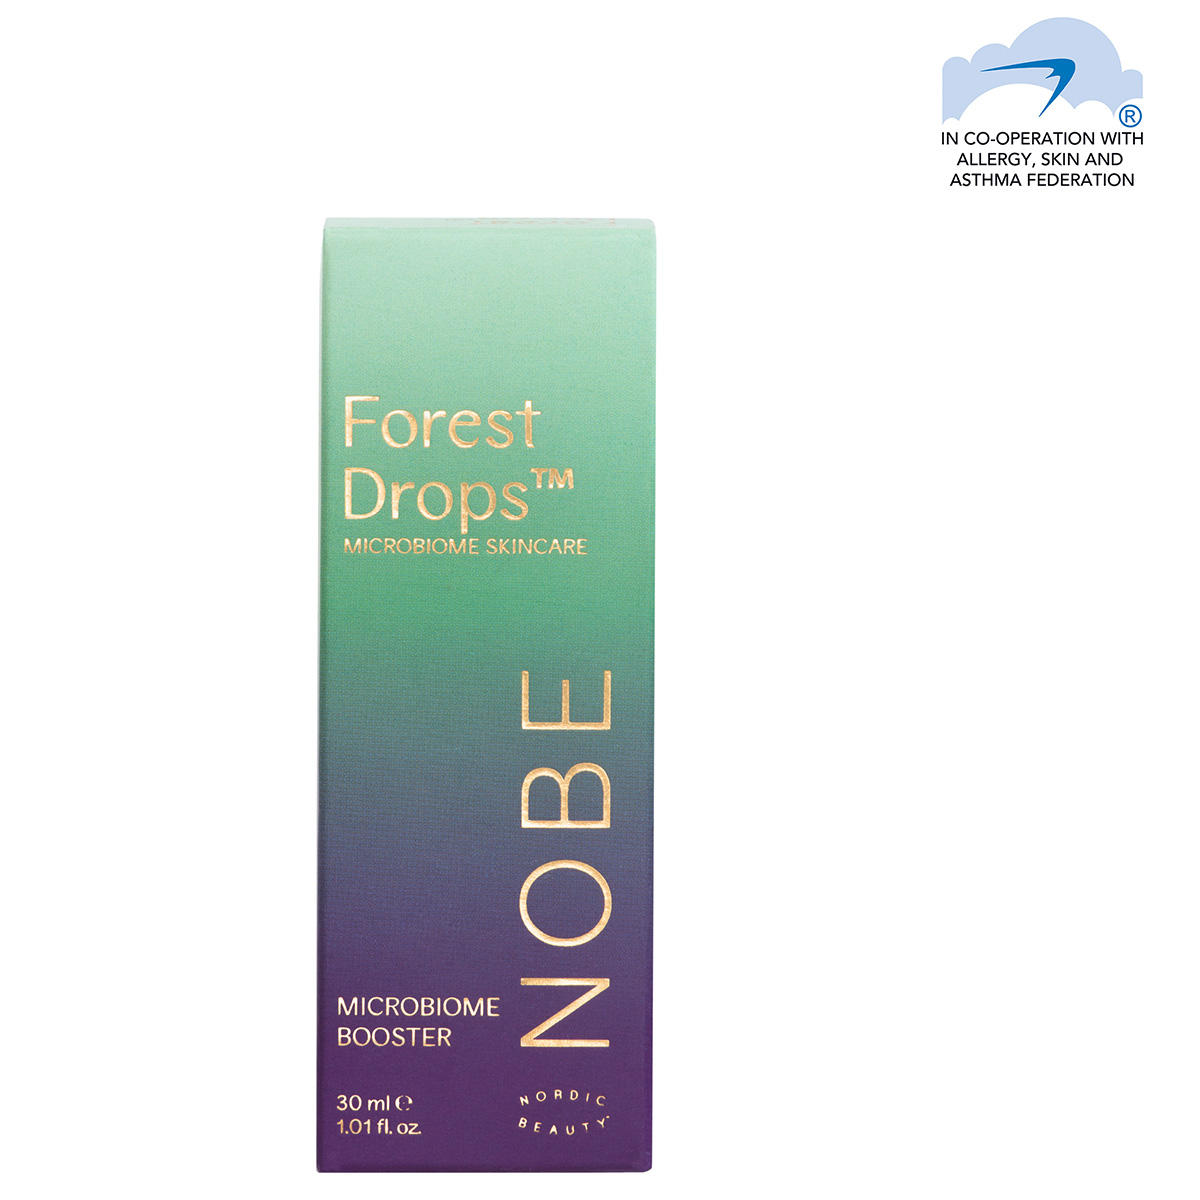 NOBE Forest Drops® Microbiome Booster 30 ml - 3